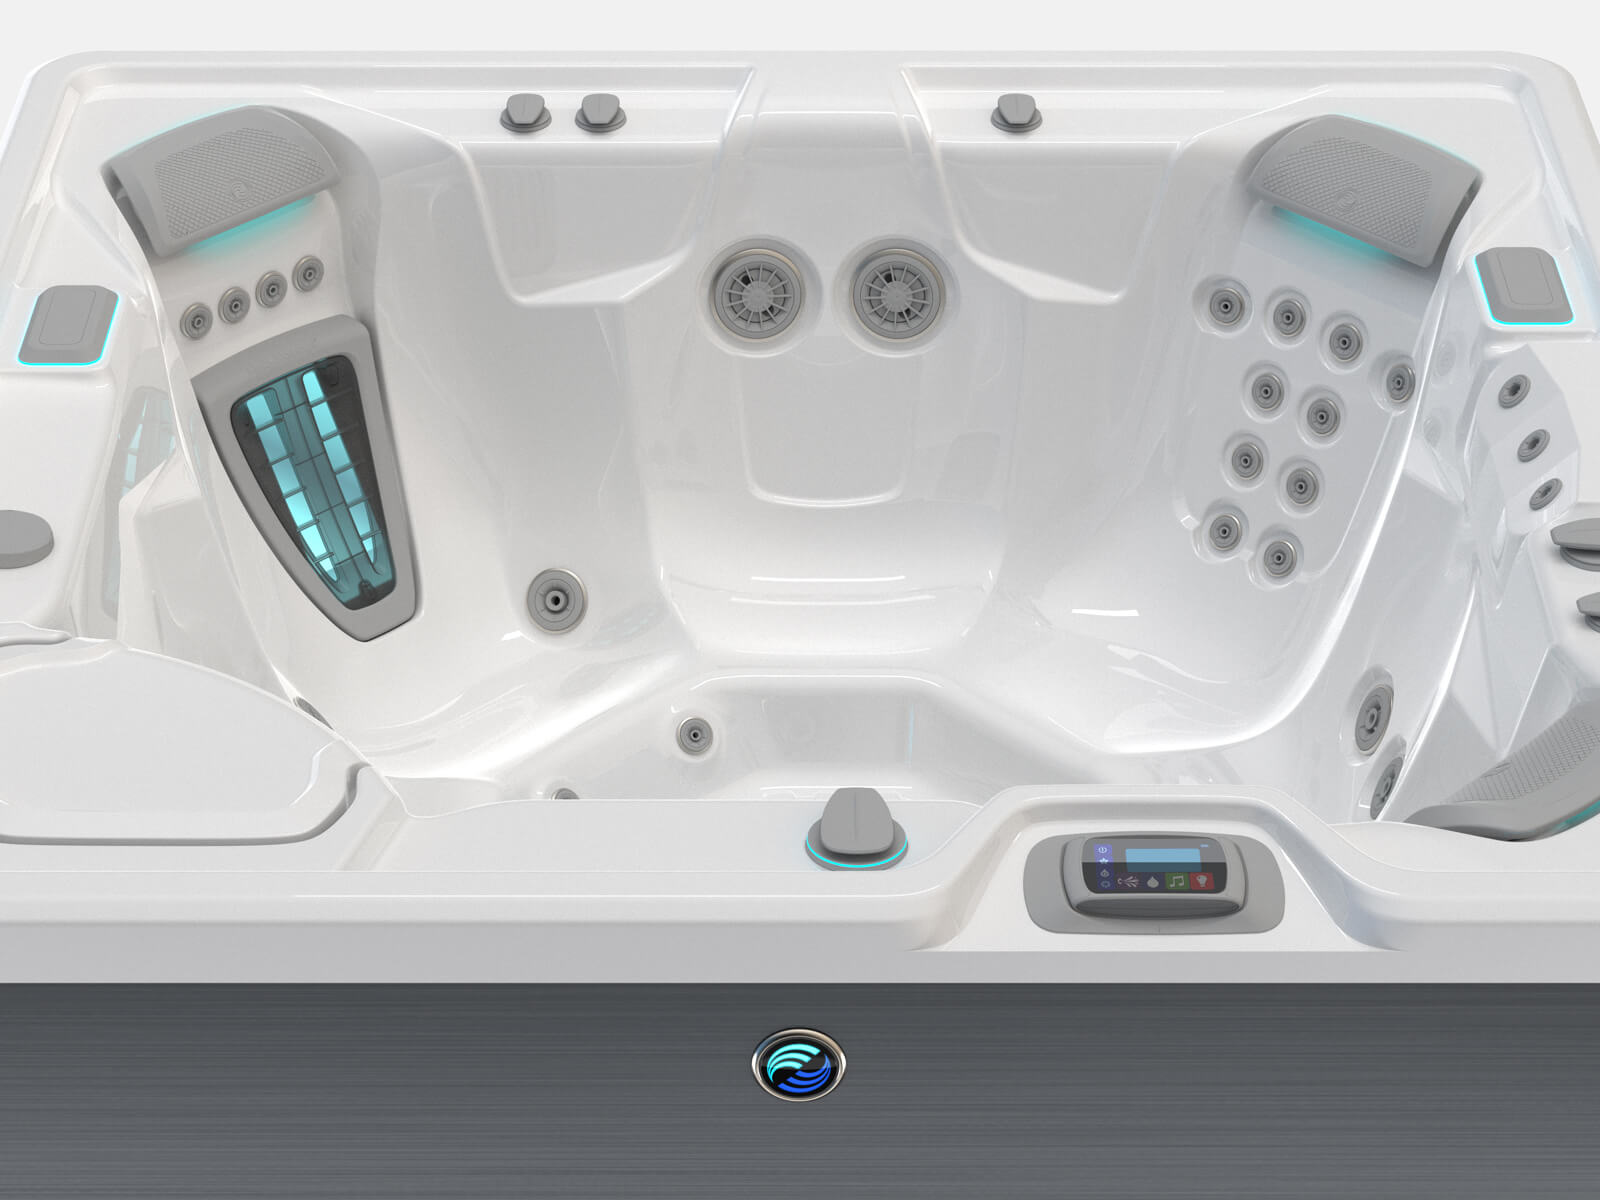 Prodigy Hot Tub Seat Spa Details | Hot Springs Spas available at the Recreational Warehouse Southwest Florida (Naples, Fort Myers and Port Charlotte Locations) Pool Warehouse